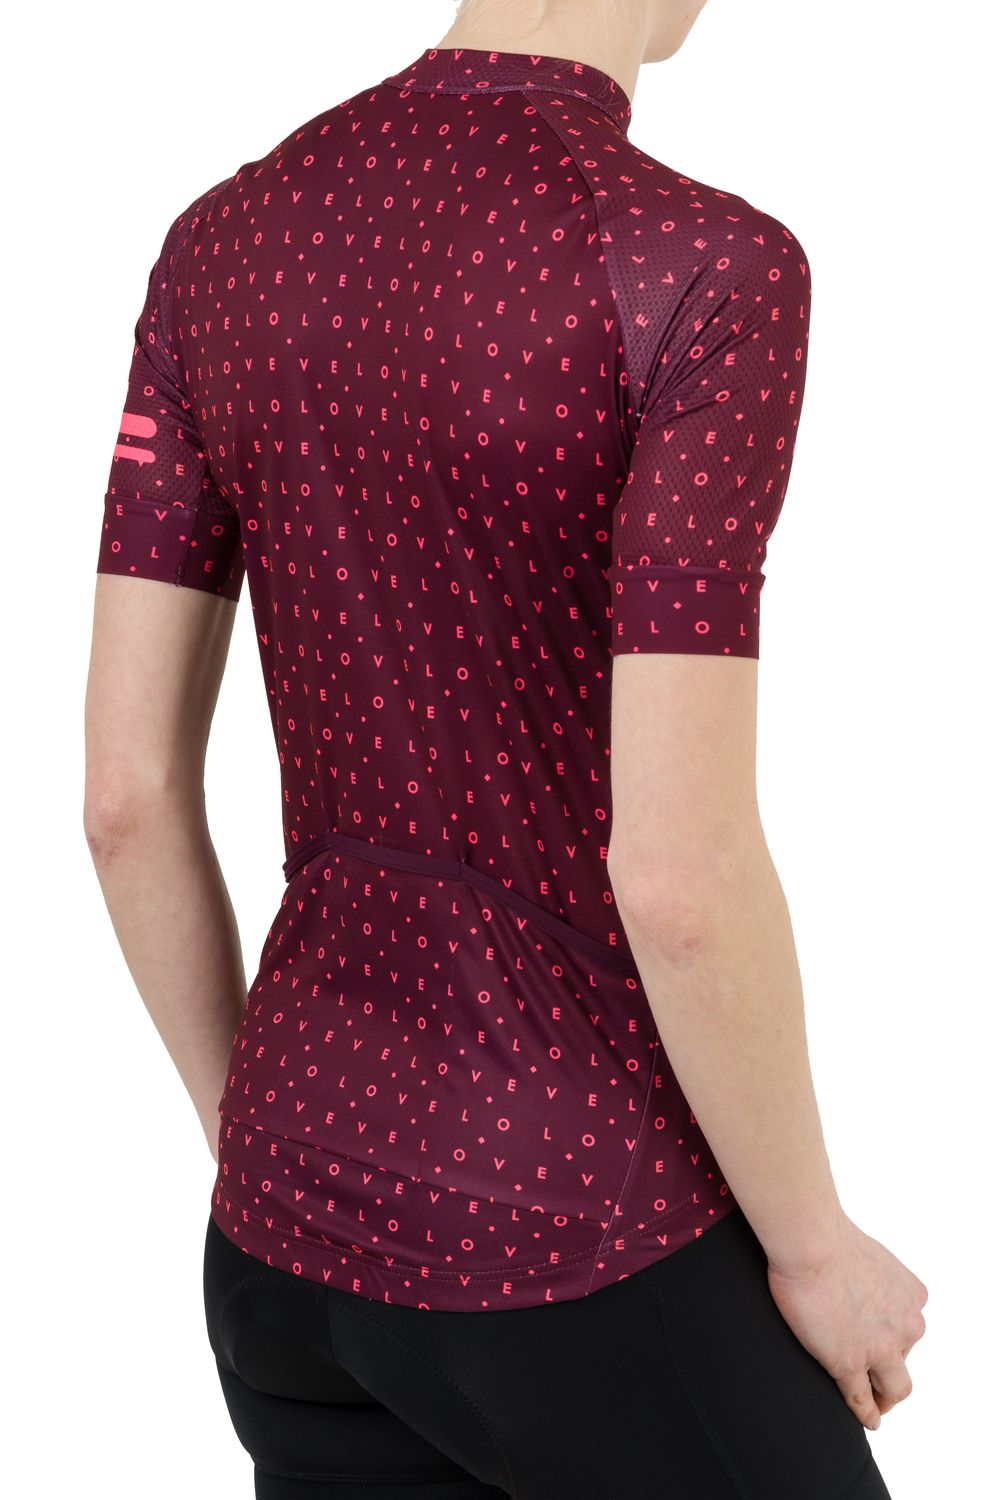 Velo Love Maglia Essential Donne fit example